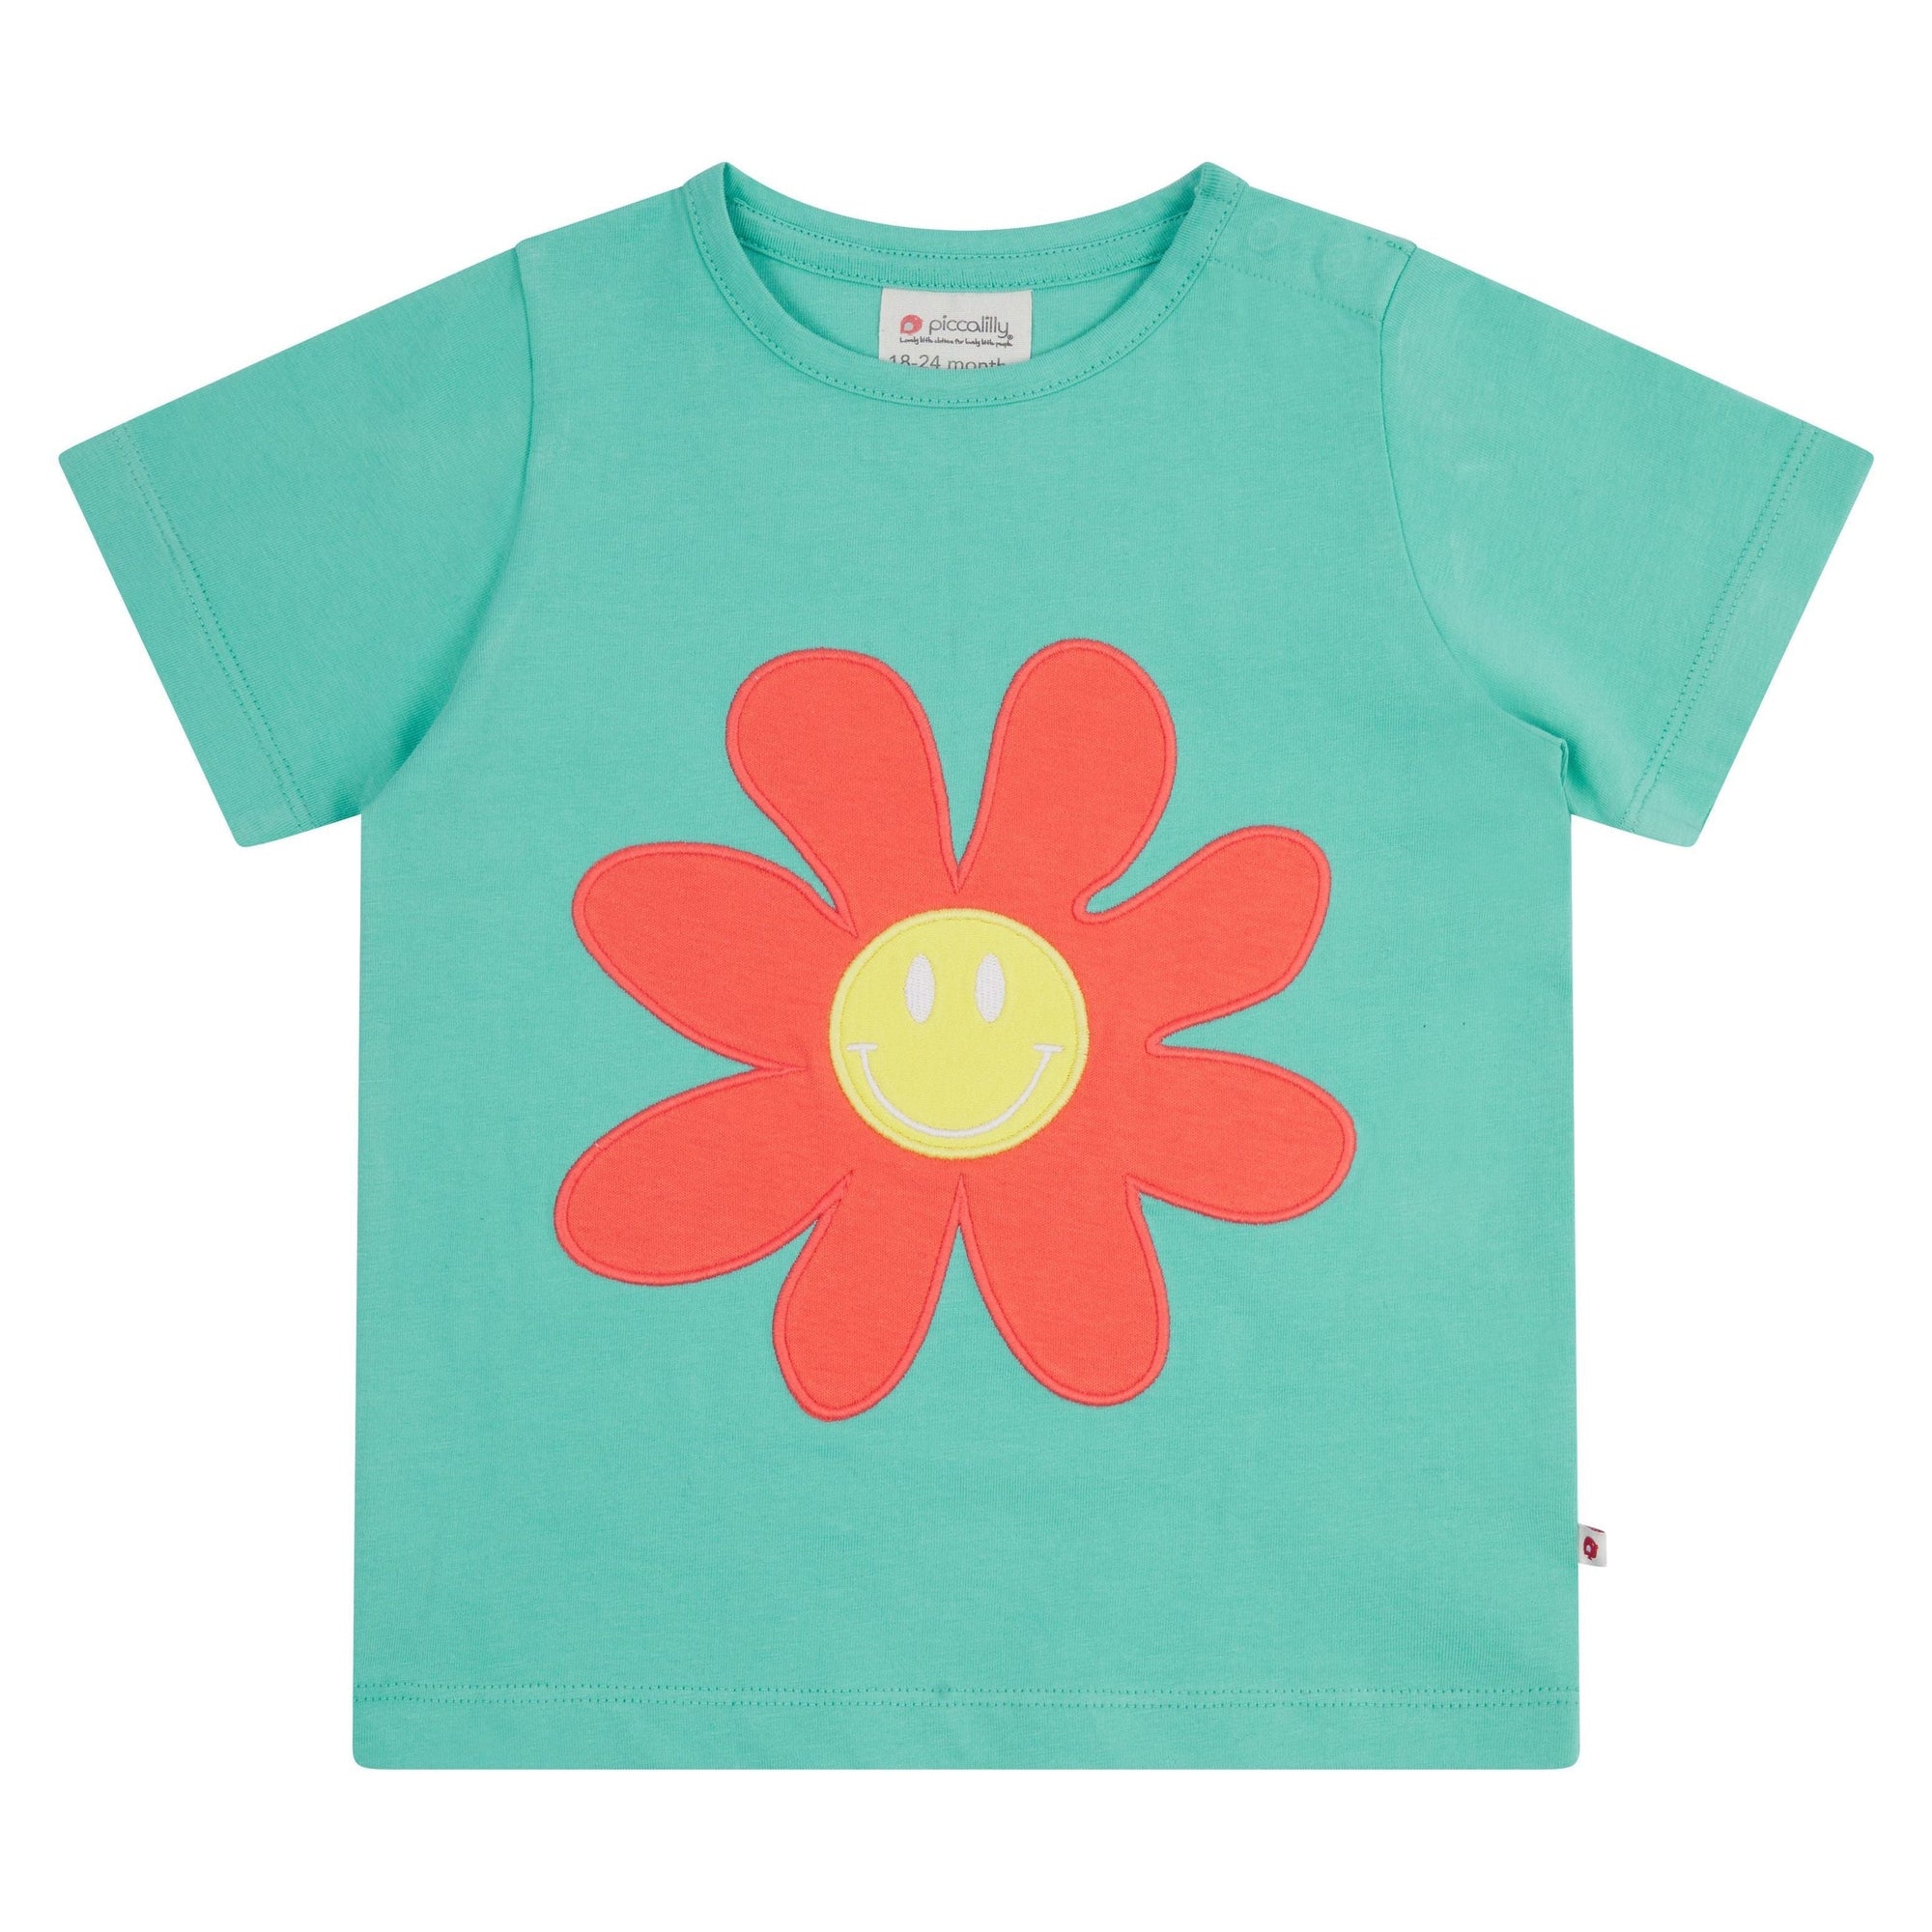 Daisy Short Sleeve Shirt - 1 Left Size 4-5 years-Piccalilly-Modern Rascals